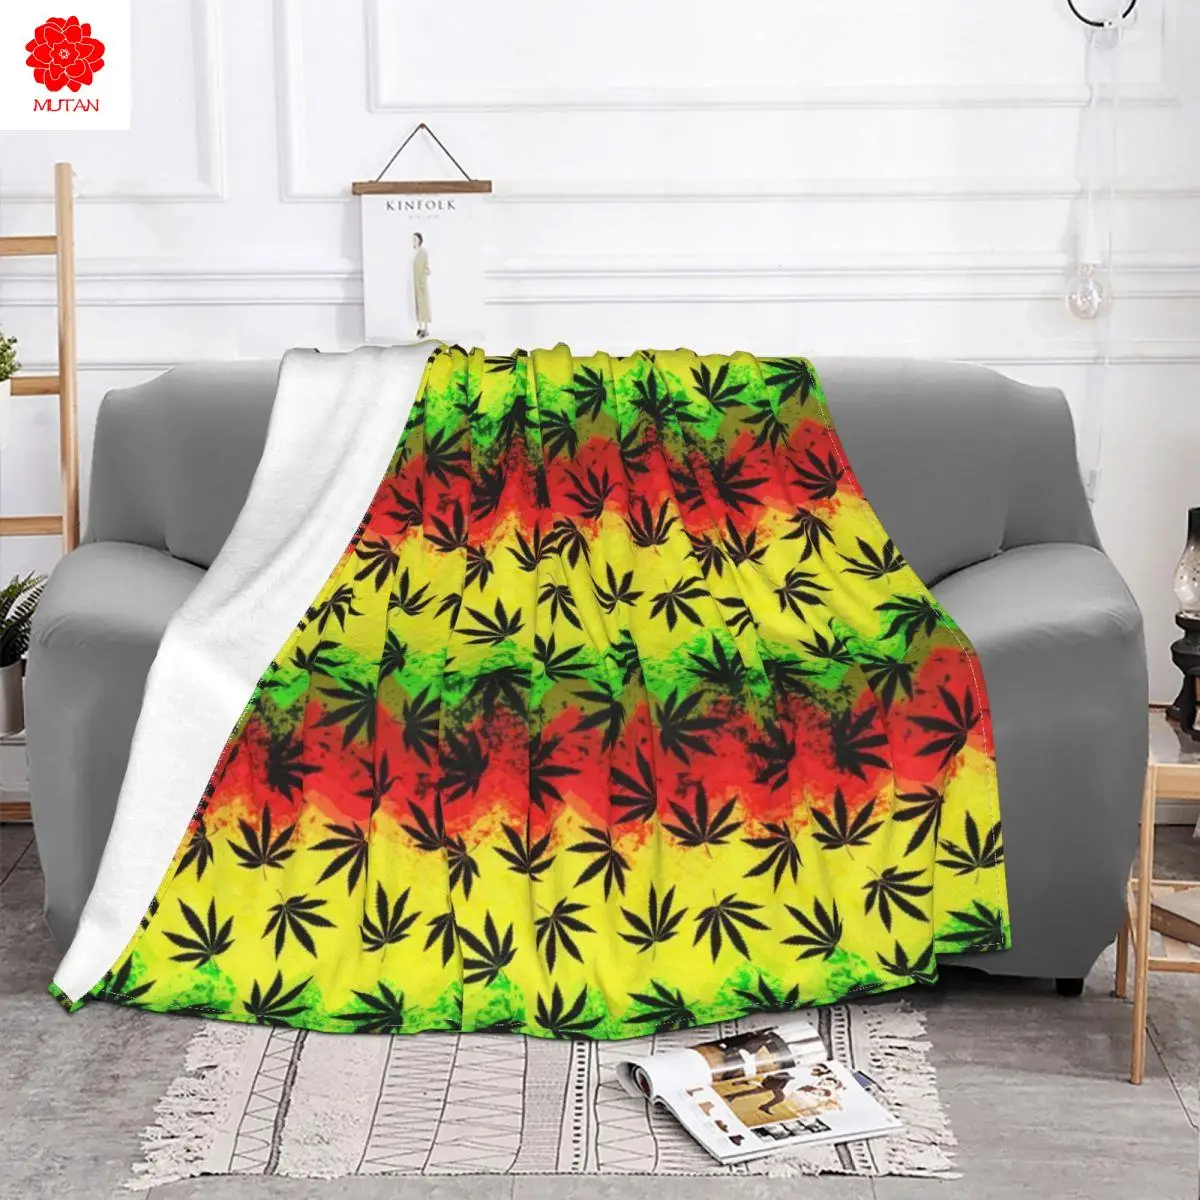 

Weed Leaf Blanket Fleece Decoration Herb Nature Multi-function Lightweight Thin Throw Blanket for Sofa Outdoor Bedspread